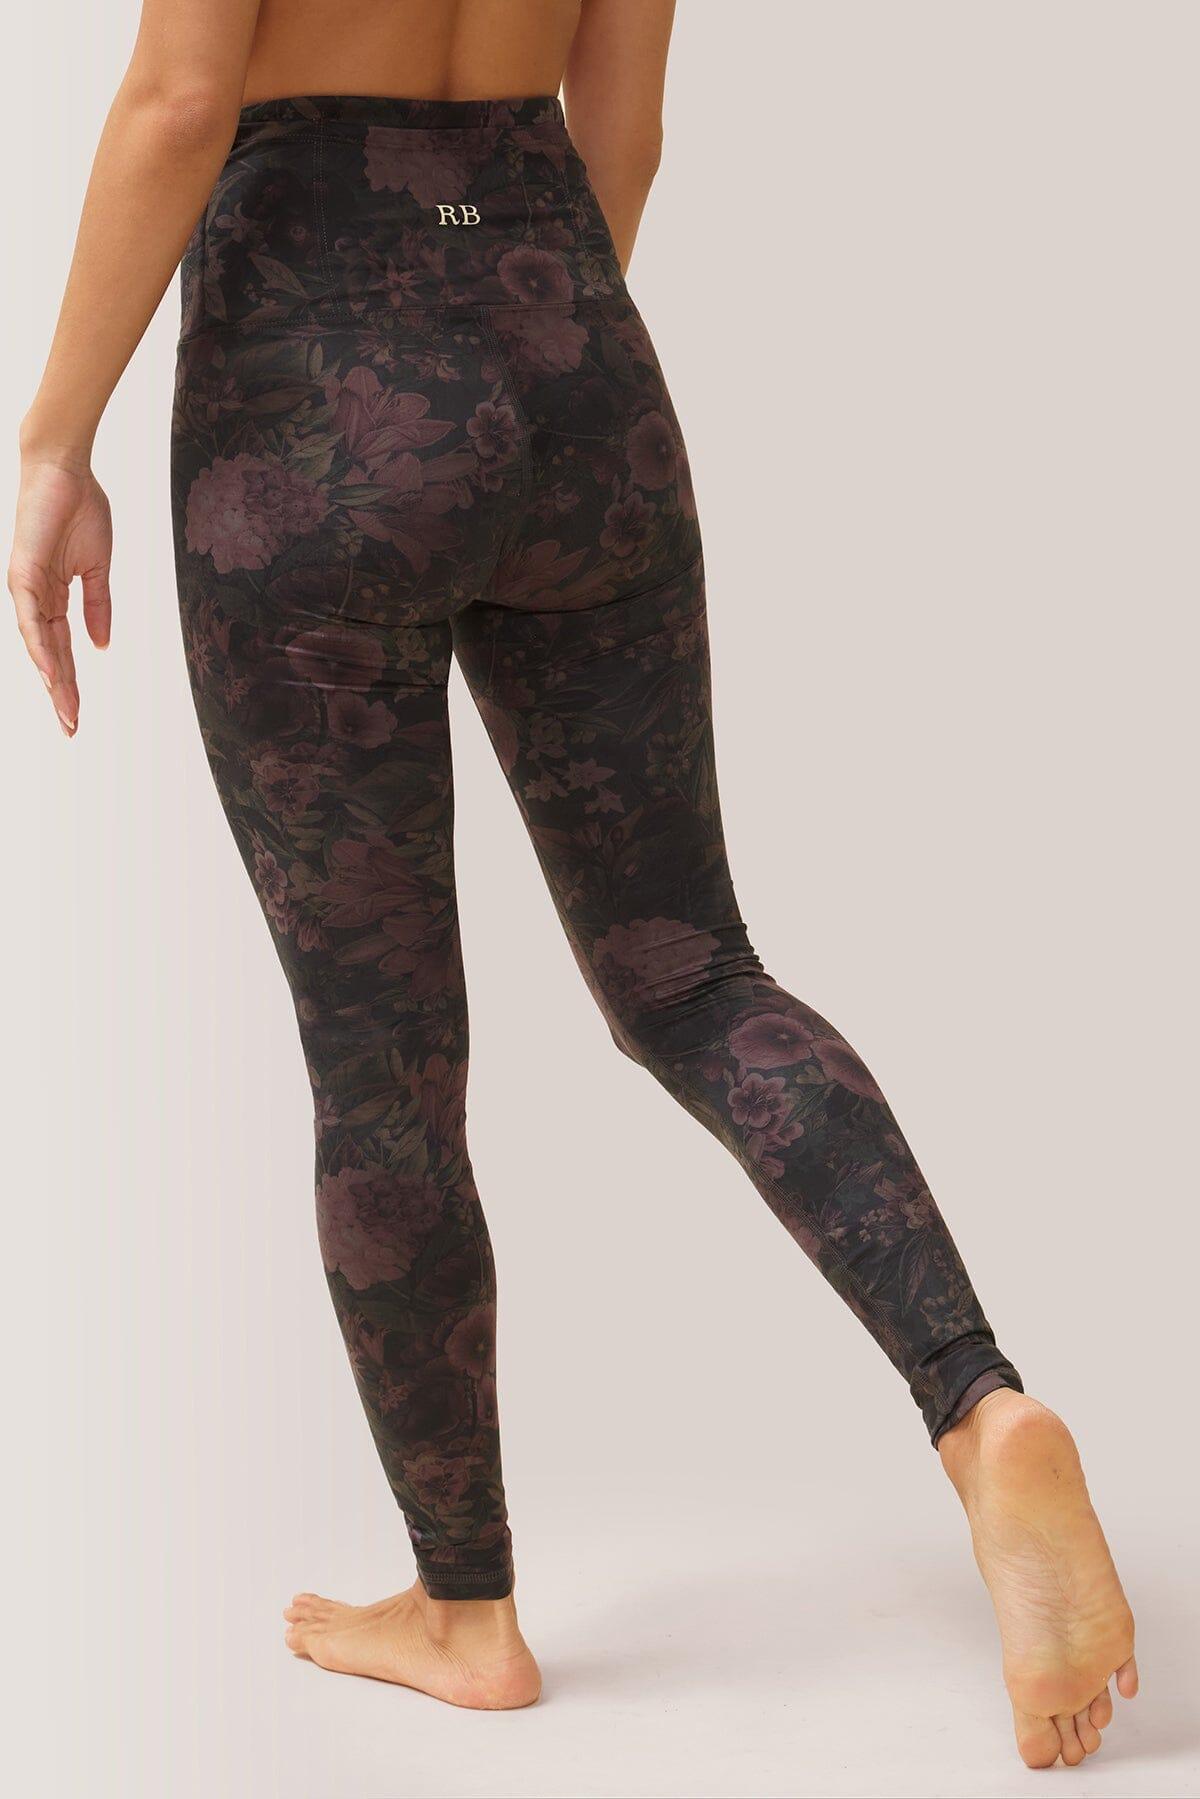 Femme qui porte les leggings Oh So Soft Microfleece de Rose Boreal./ Women wearing the Oh So Soft Mid-Compression Microfleece Legging by Rose Boreal. -Fall Poppies / Pavots Automne